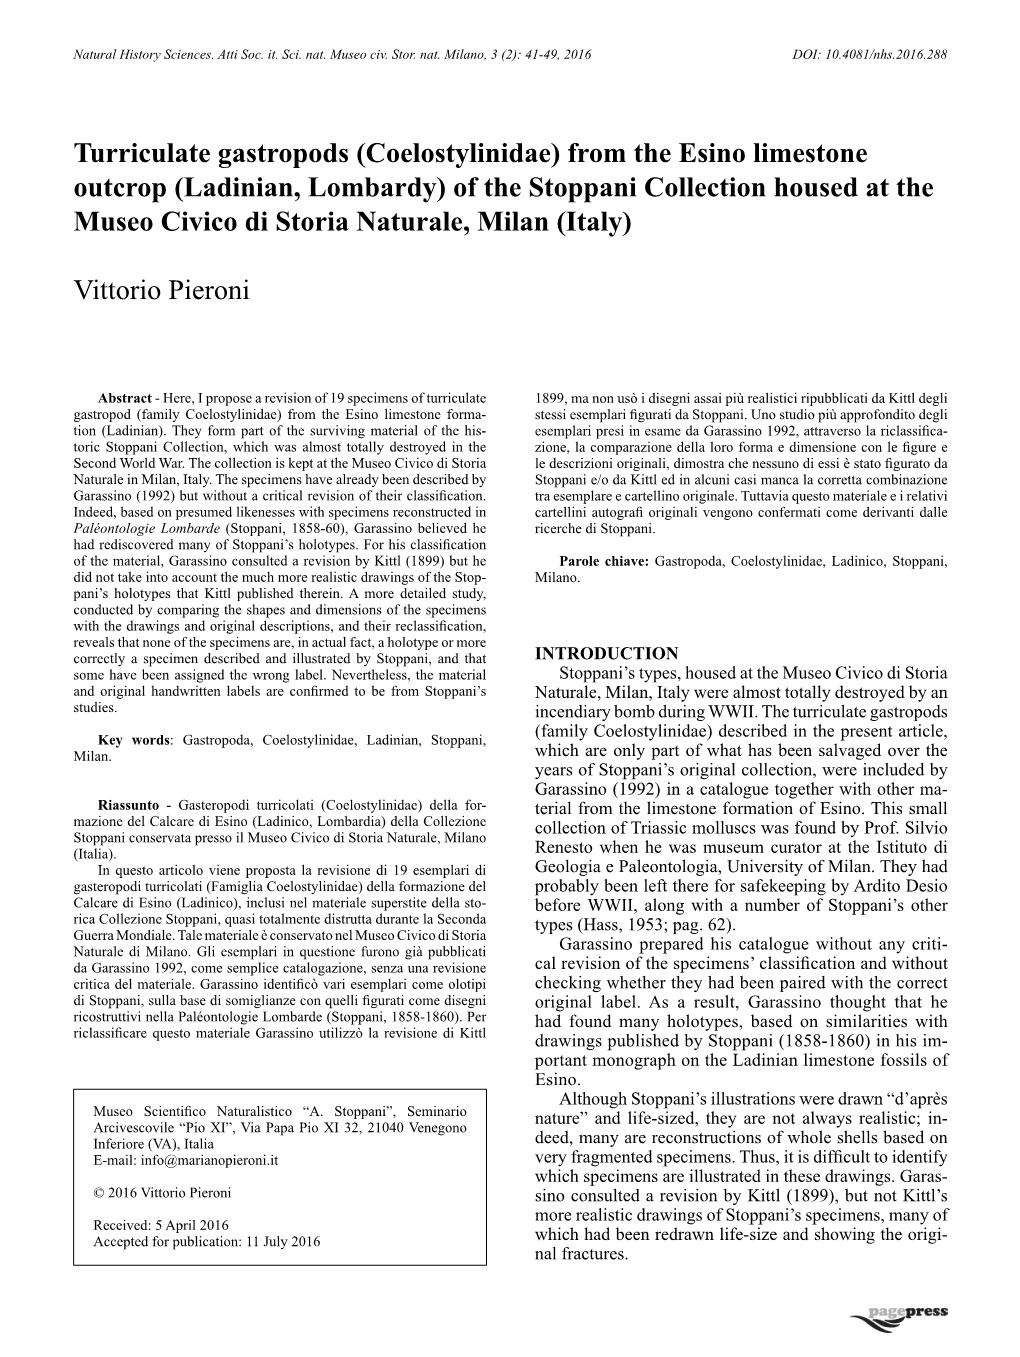 Turriculate Gastropods (Coelostylinidae) from the Esino Limestone Outcrop